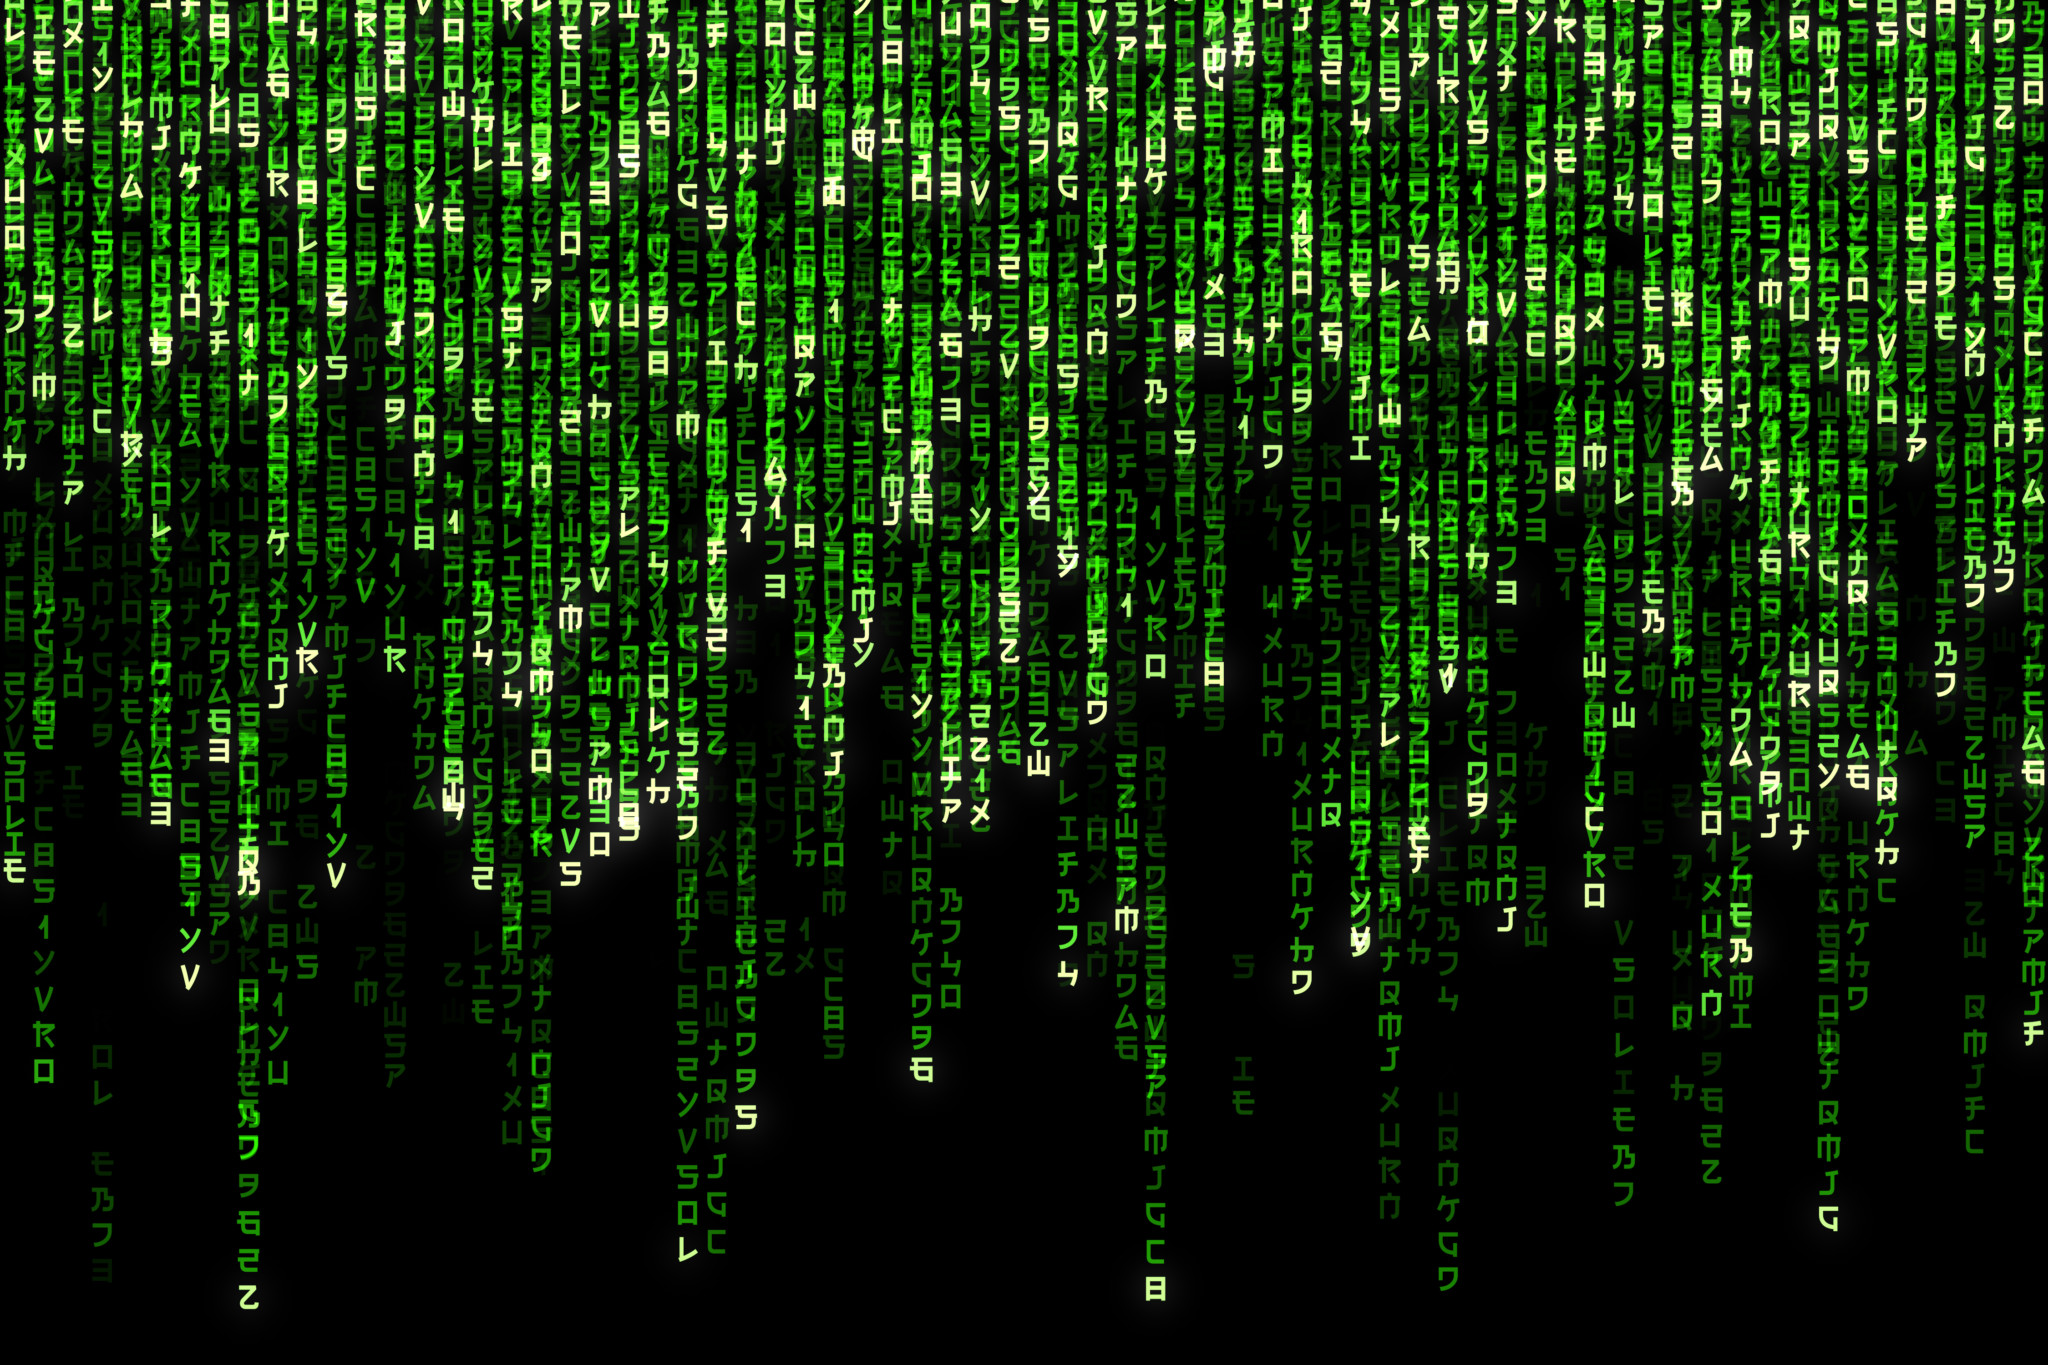 Green text cascading down the screen in a fashion similar to the Matrix movies